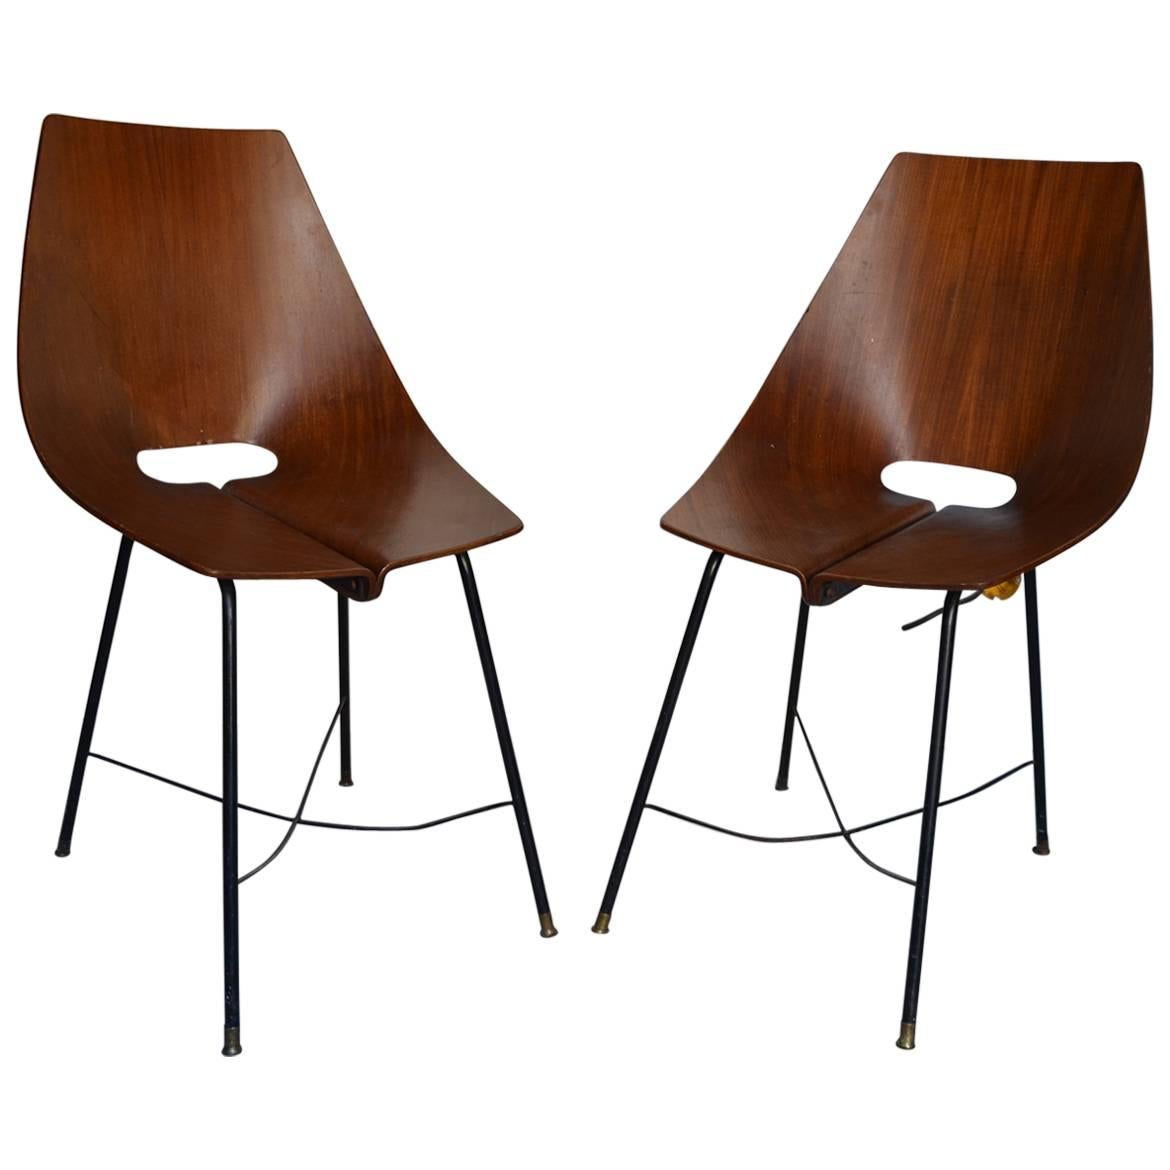 Beautiful Set of Two Italian Chairs Designed by Carlo Ratti, circa 1960 For Sale